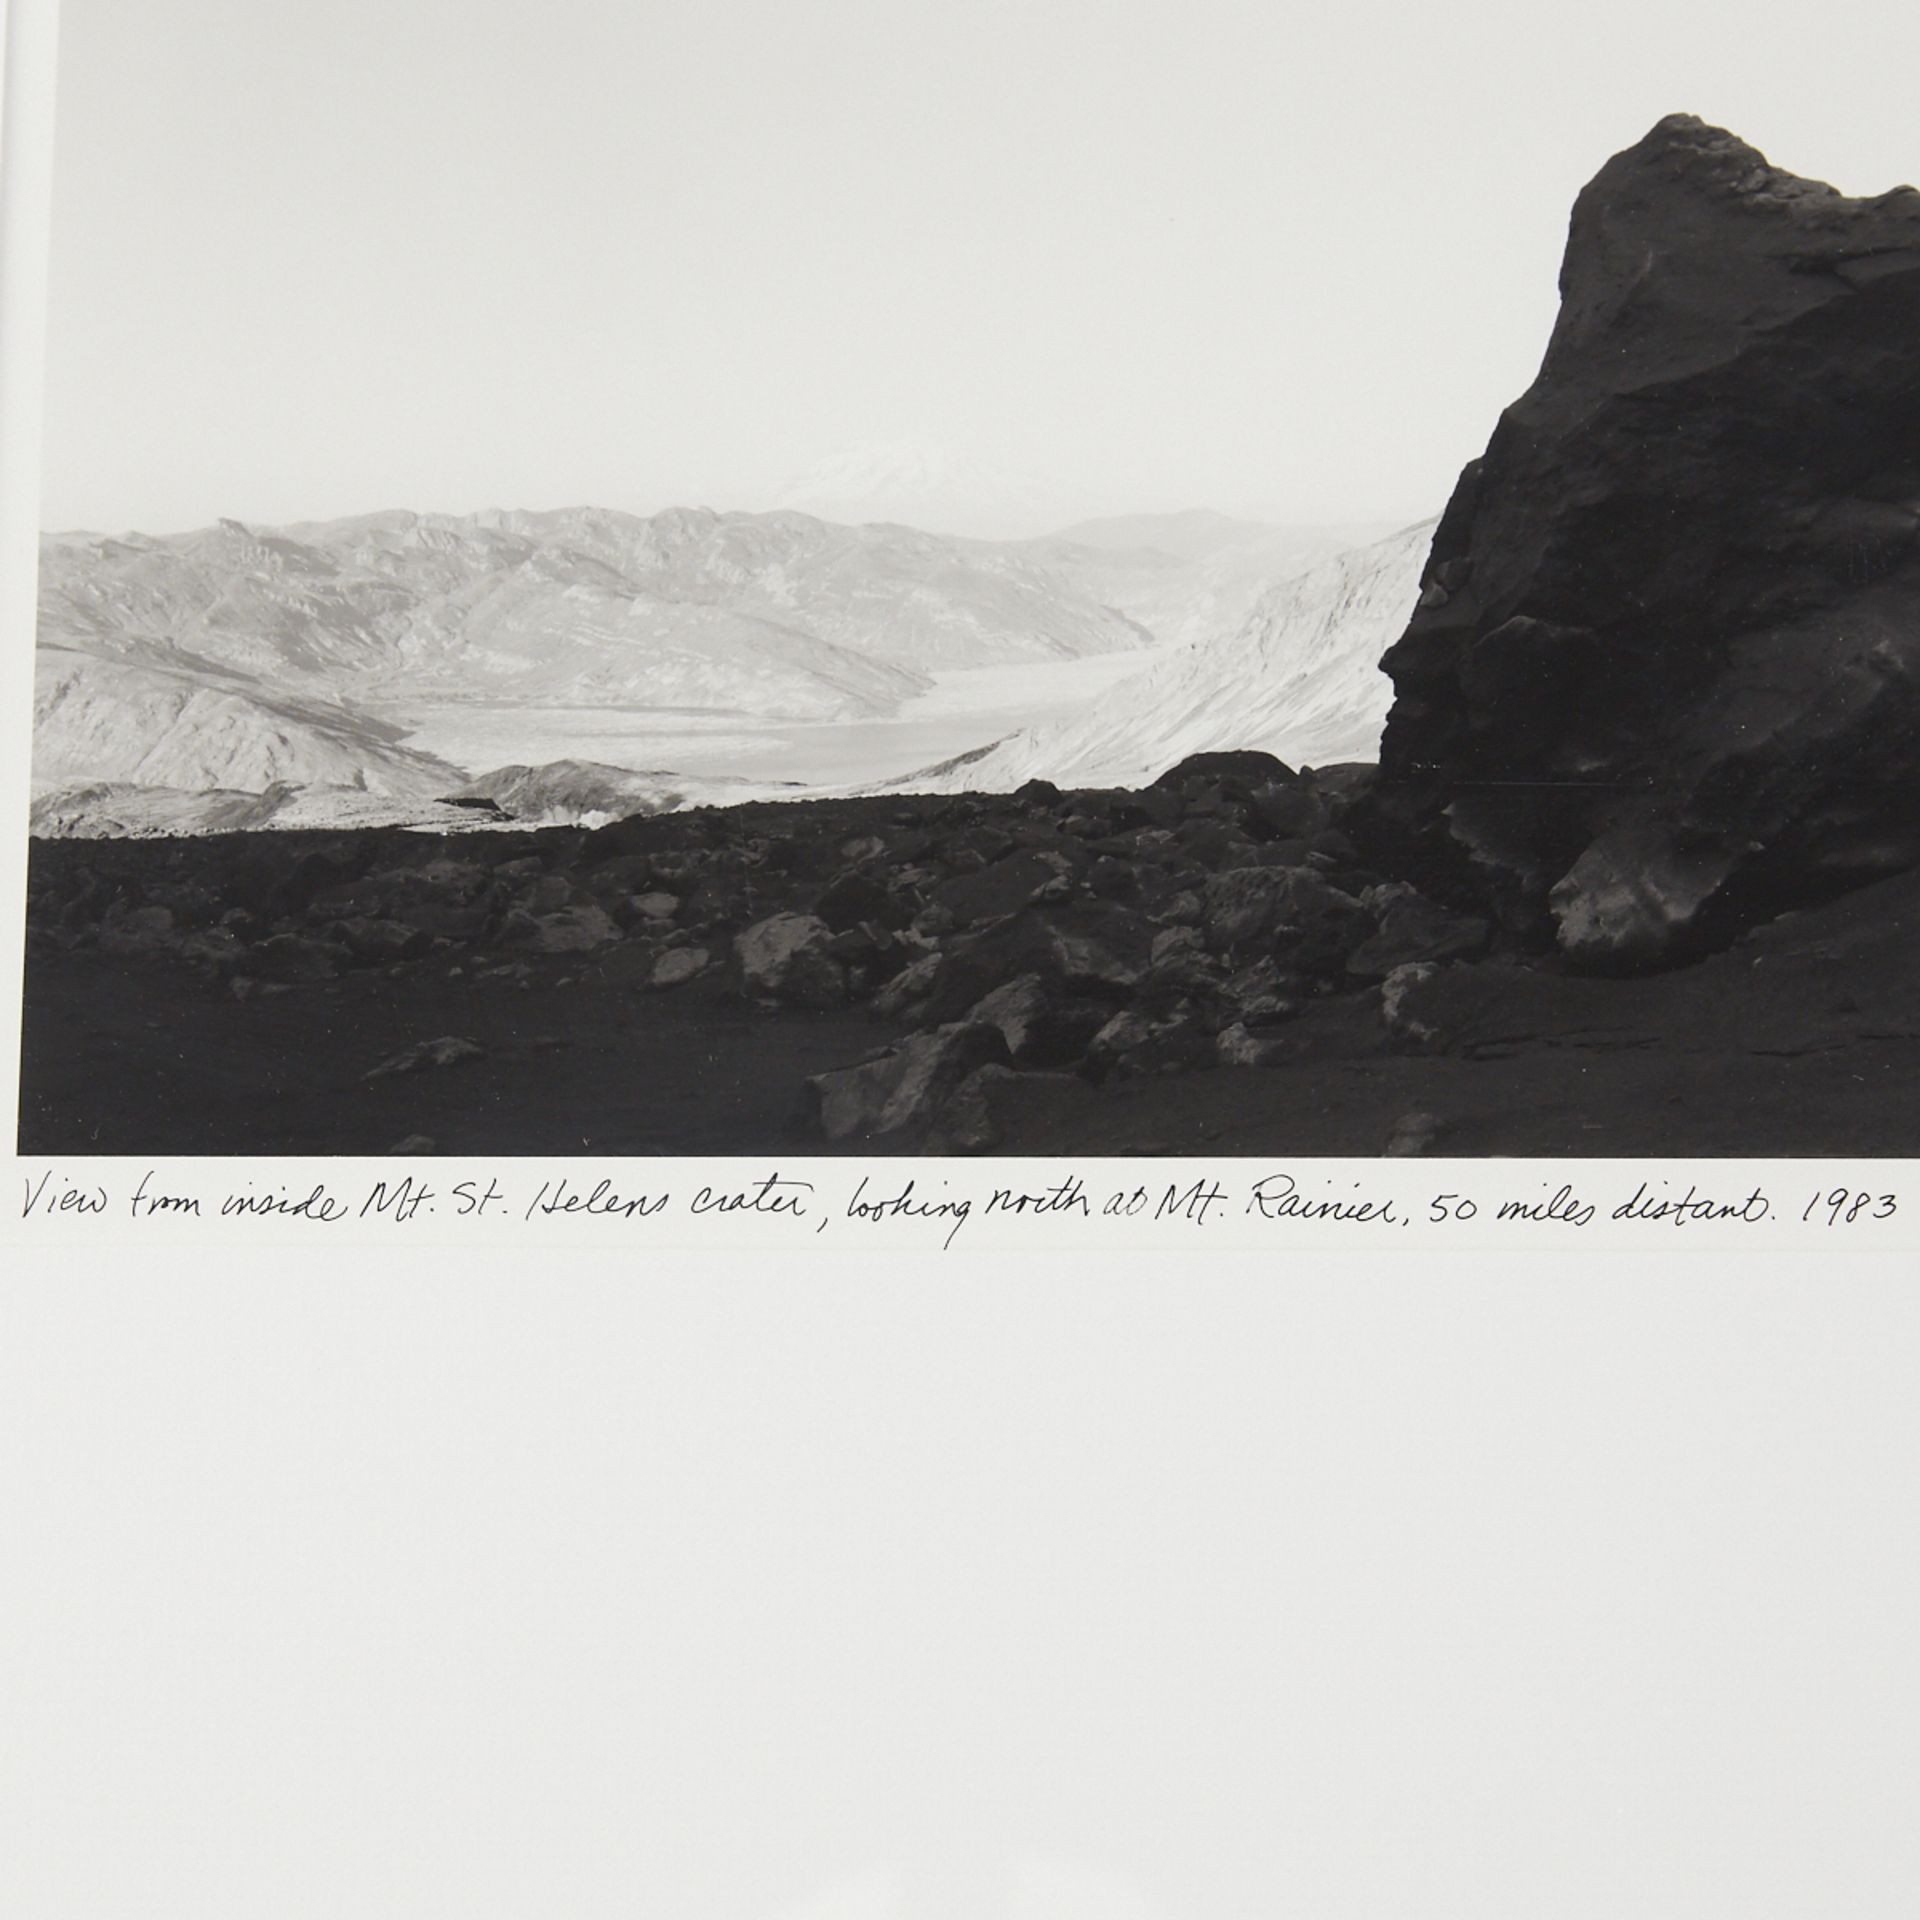 Frank Gohlke "View from Inside Mt. St. Helens" Photograph - Image 3 of 3